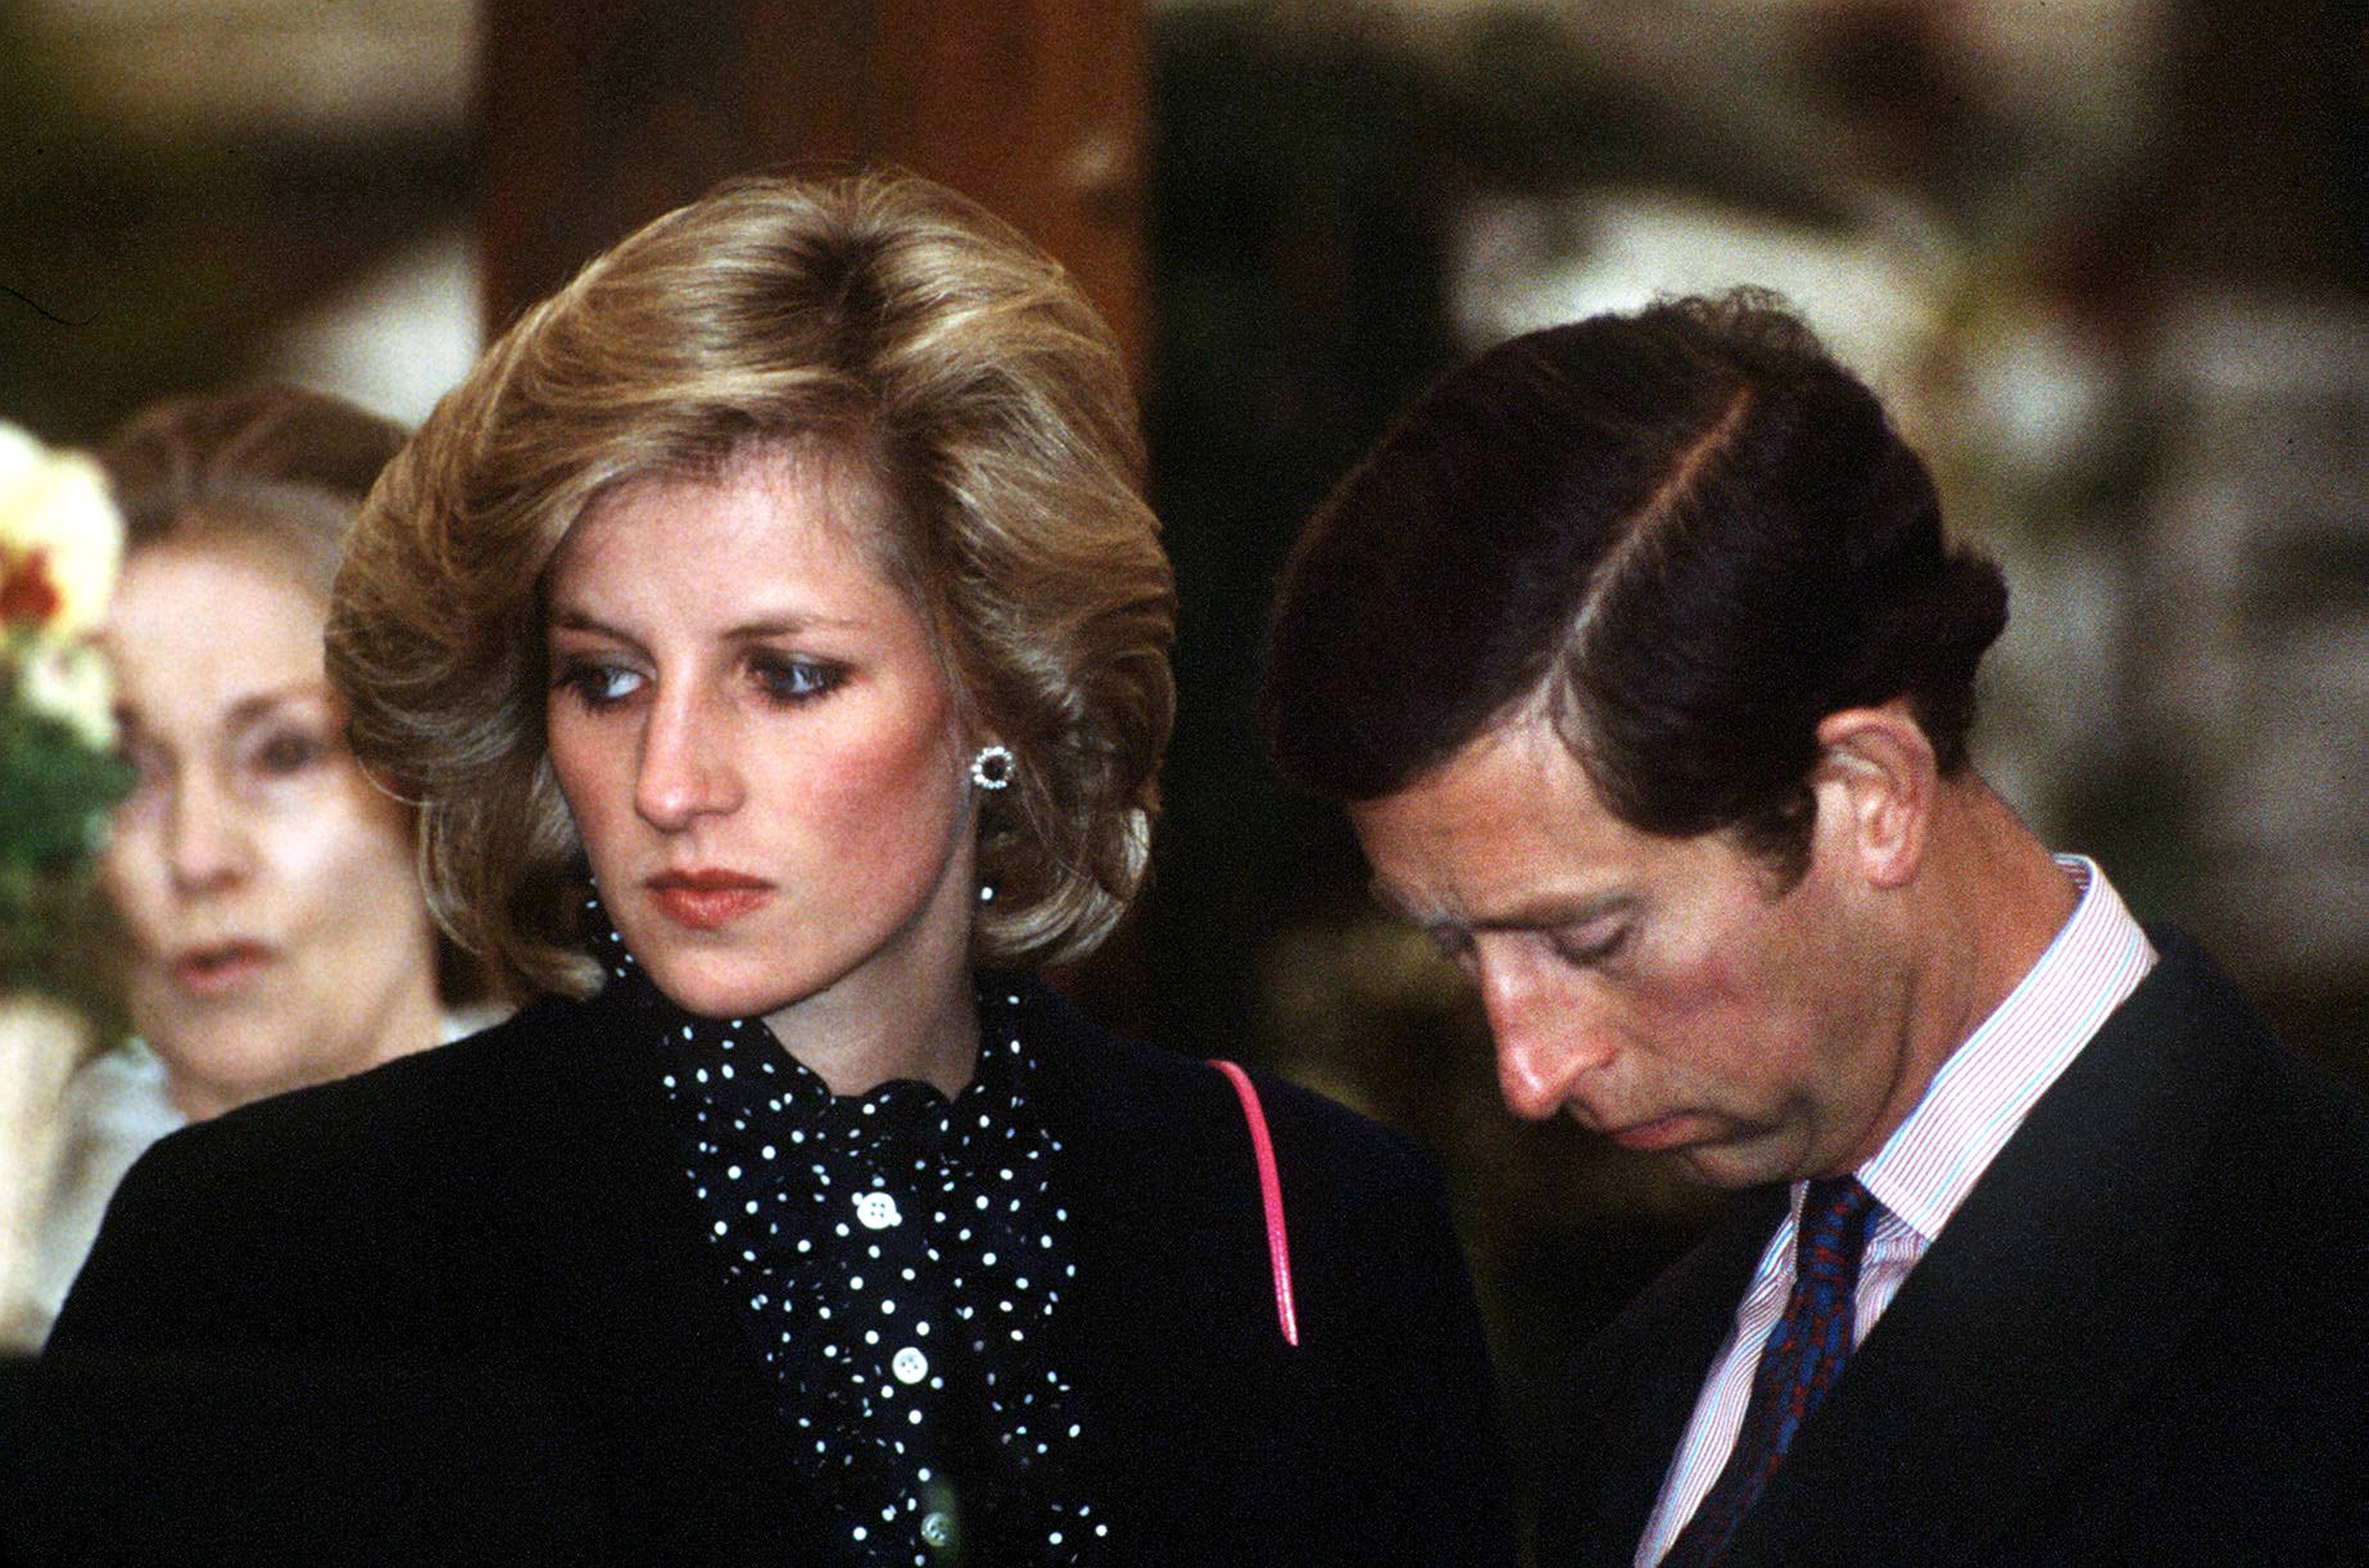 Princess Dian and her husband Prince Charles at the Chelsea Flower Show in May 1984 in London.┃Source: Getty Images